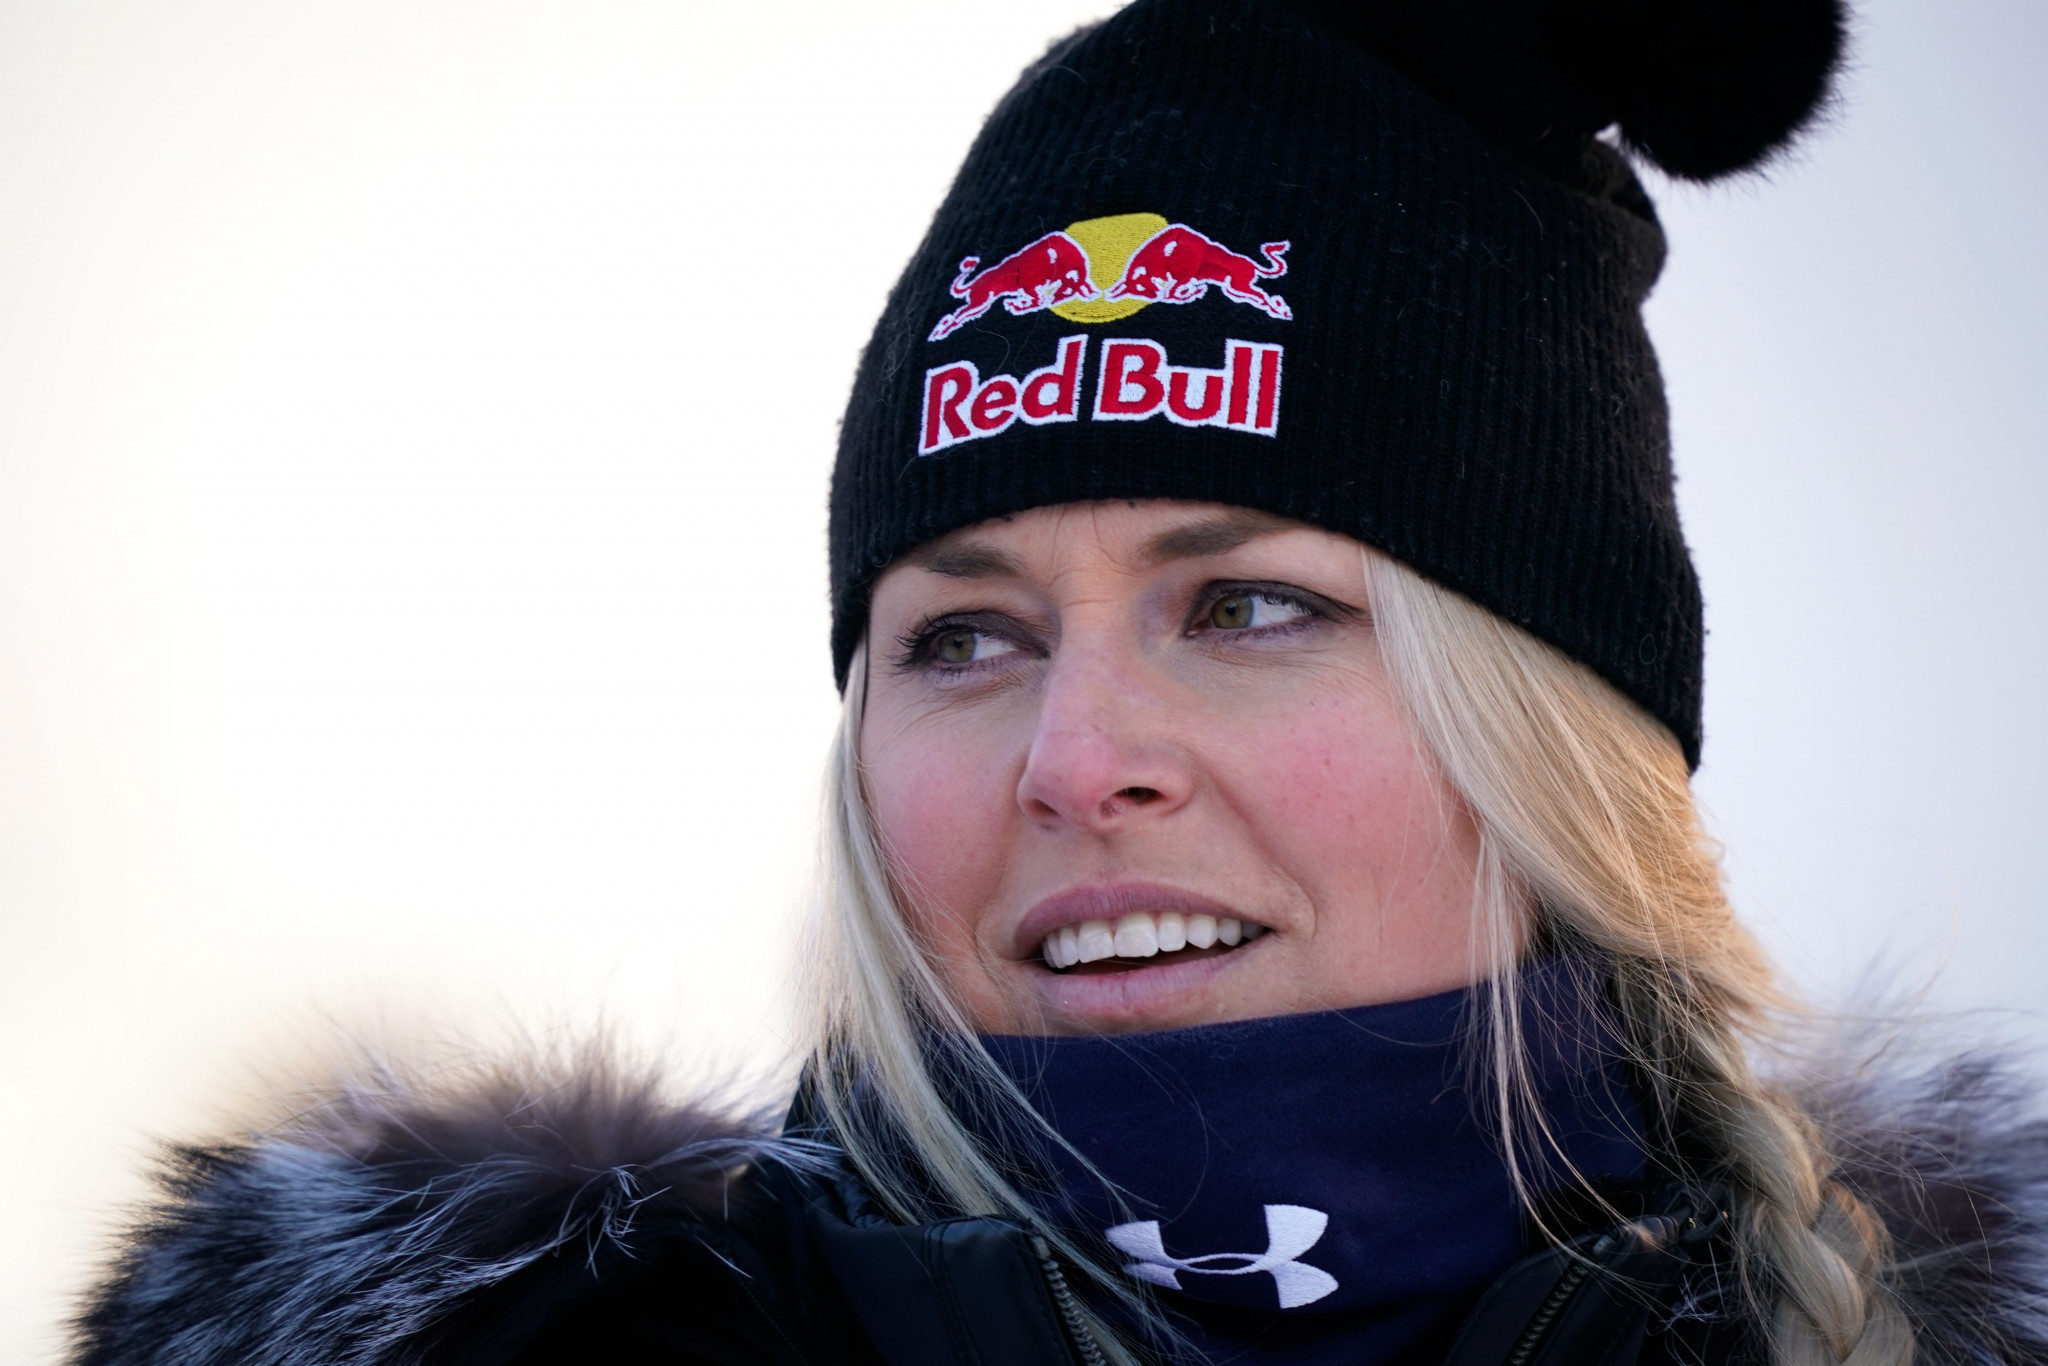 Lindsey Vonn of the United States will compete in her last event at the FIS Alpine World Ski Championships in Åre ©Getty Images